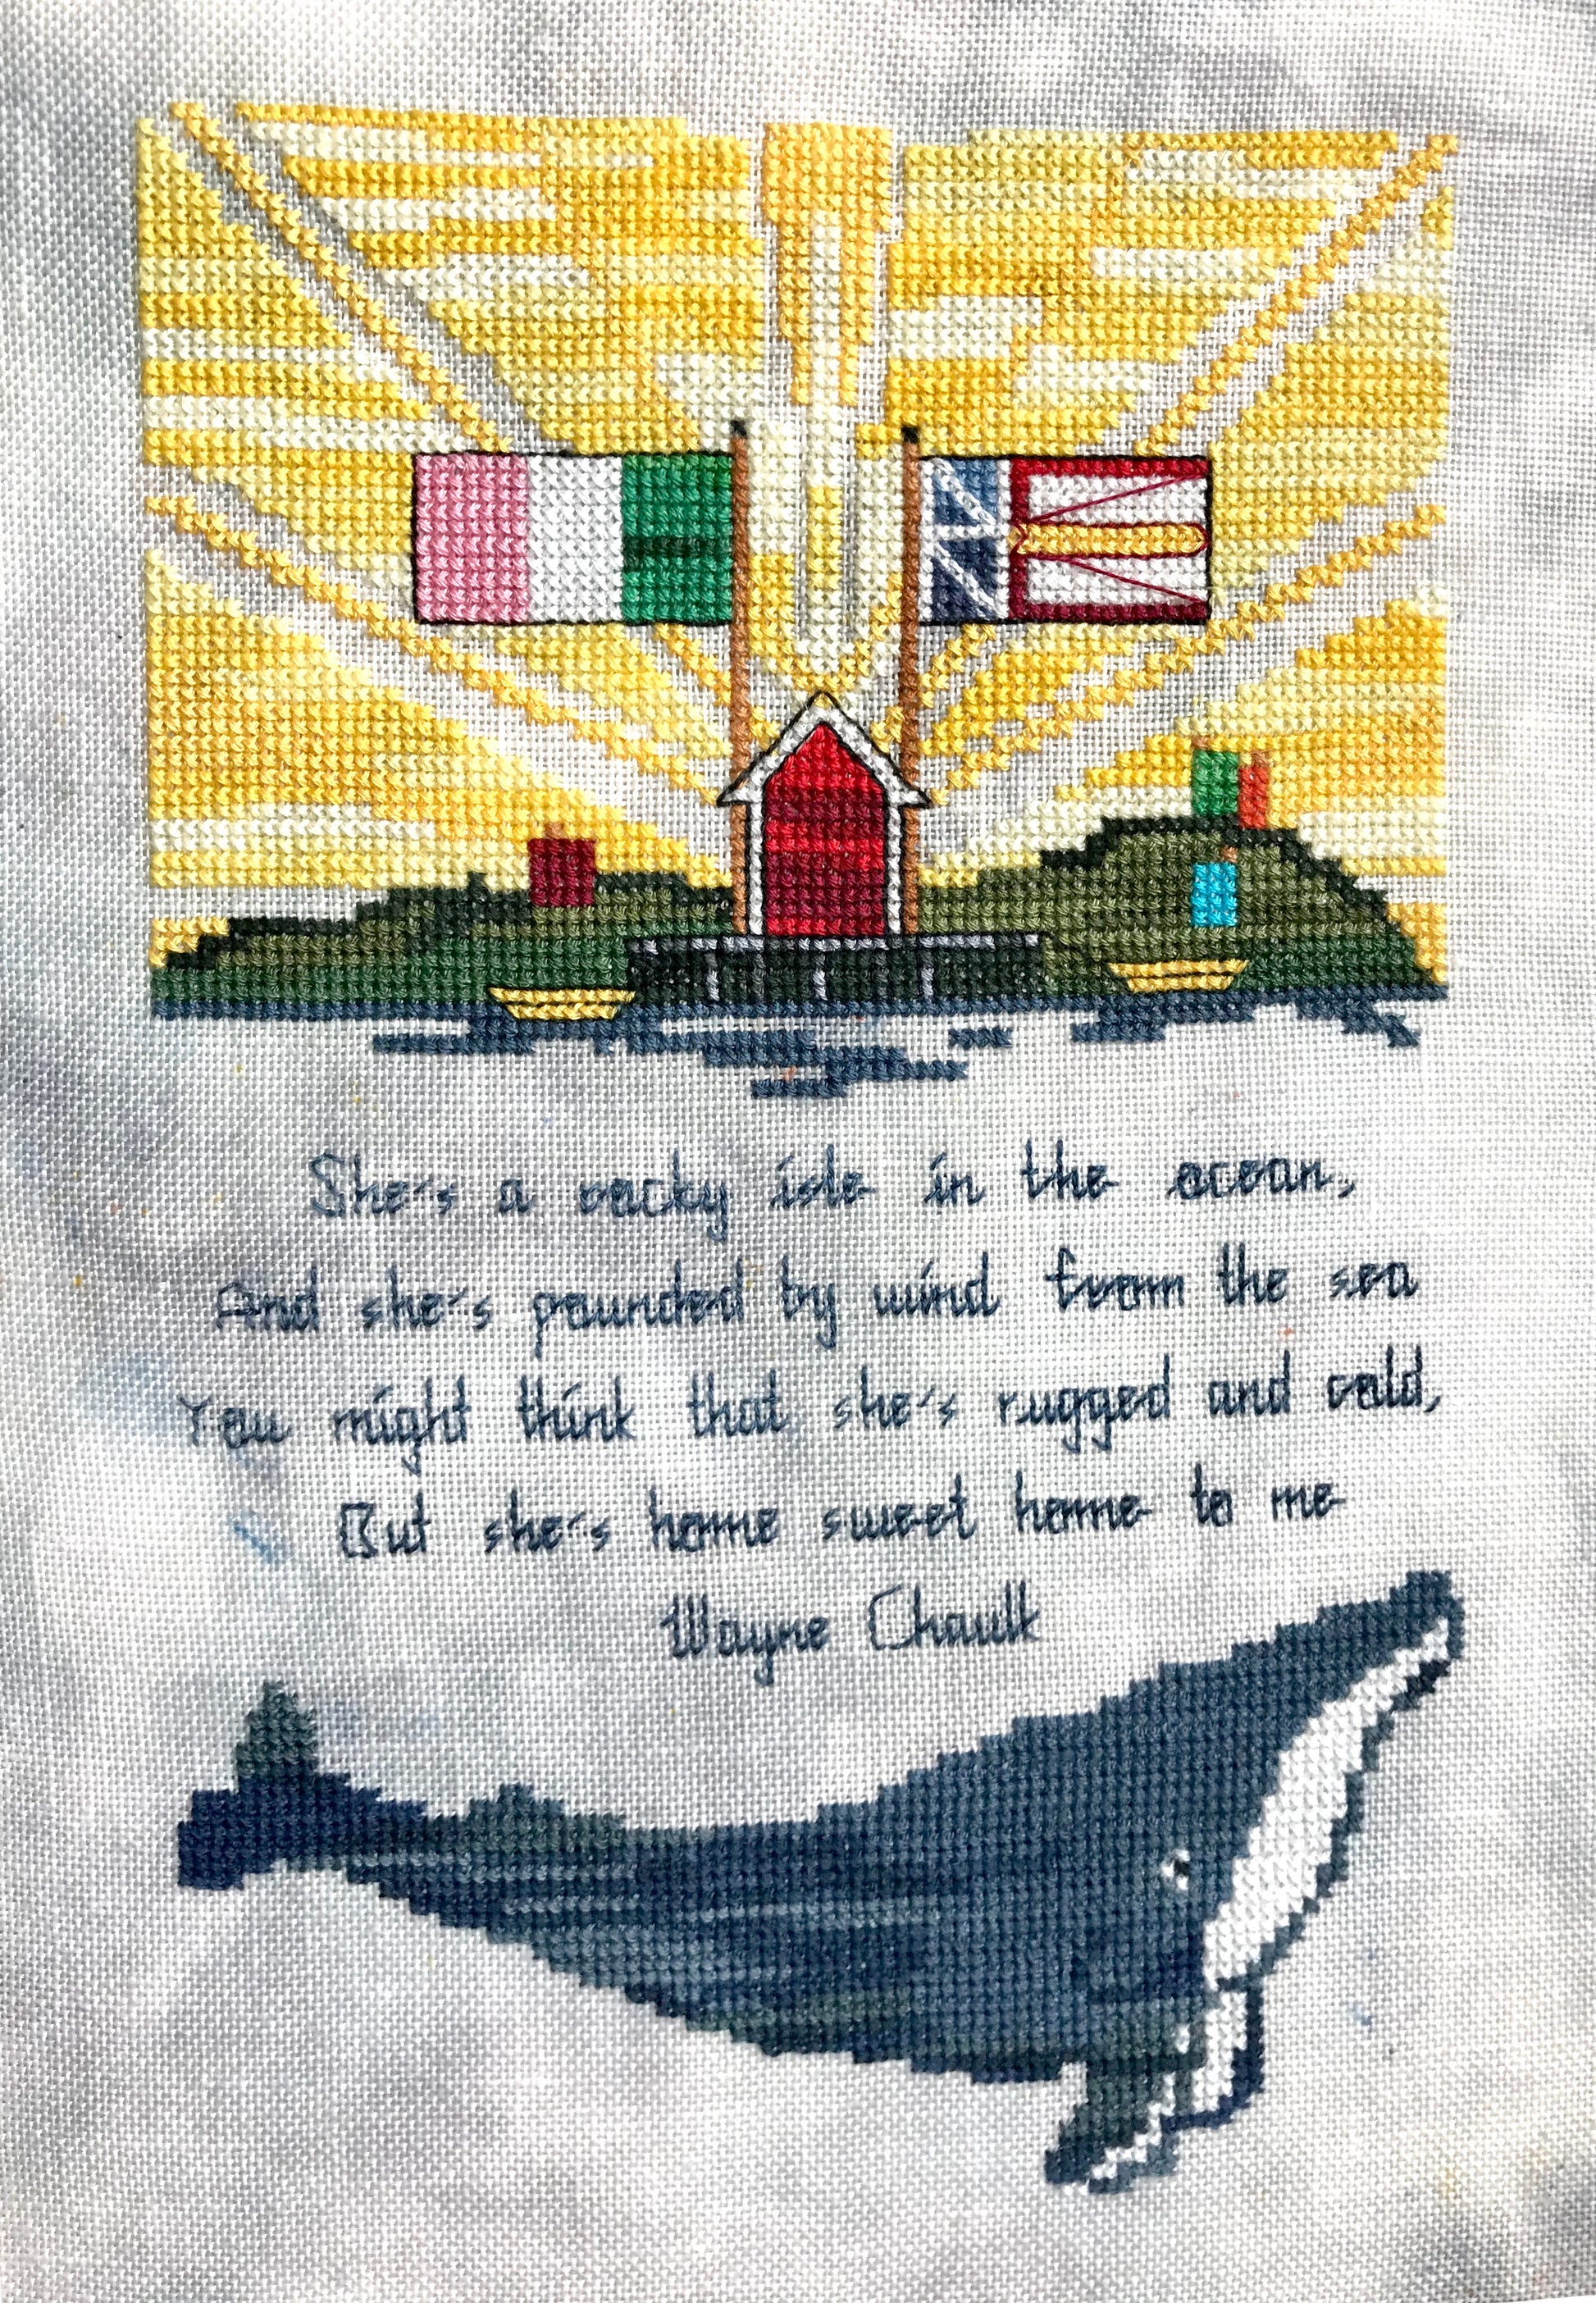 Cross stitched yellow sun rays behind the Republic of Newfoundland and Newfoundland flag over a fishing stage with words of Wayne Chauk's Song for Newfoundland in the middle and a humpback whale underneath.